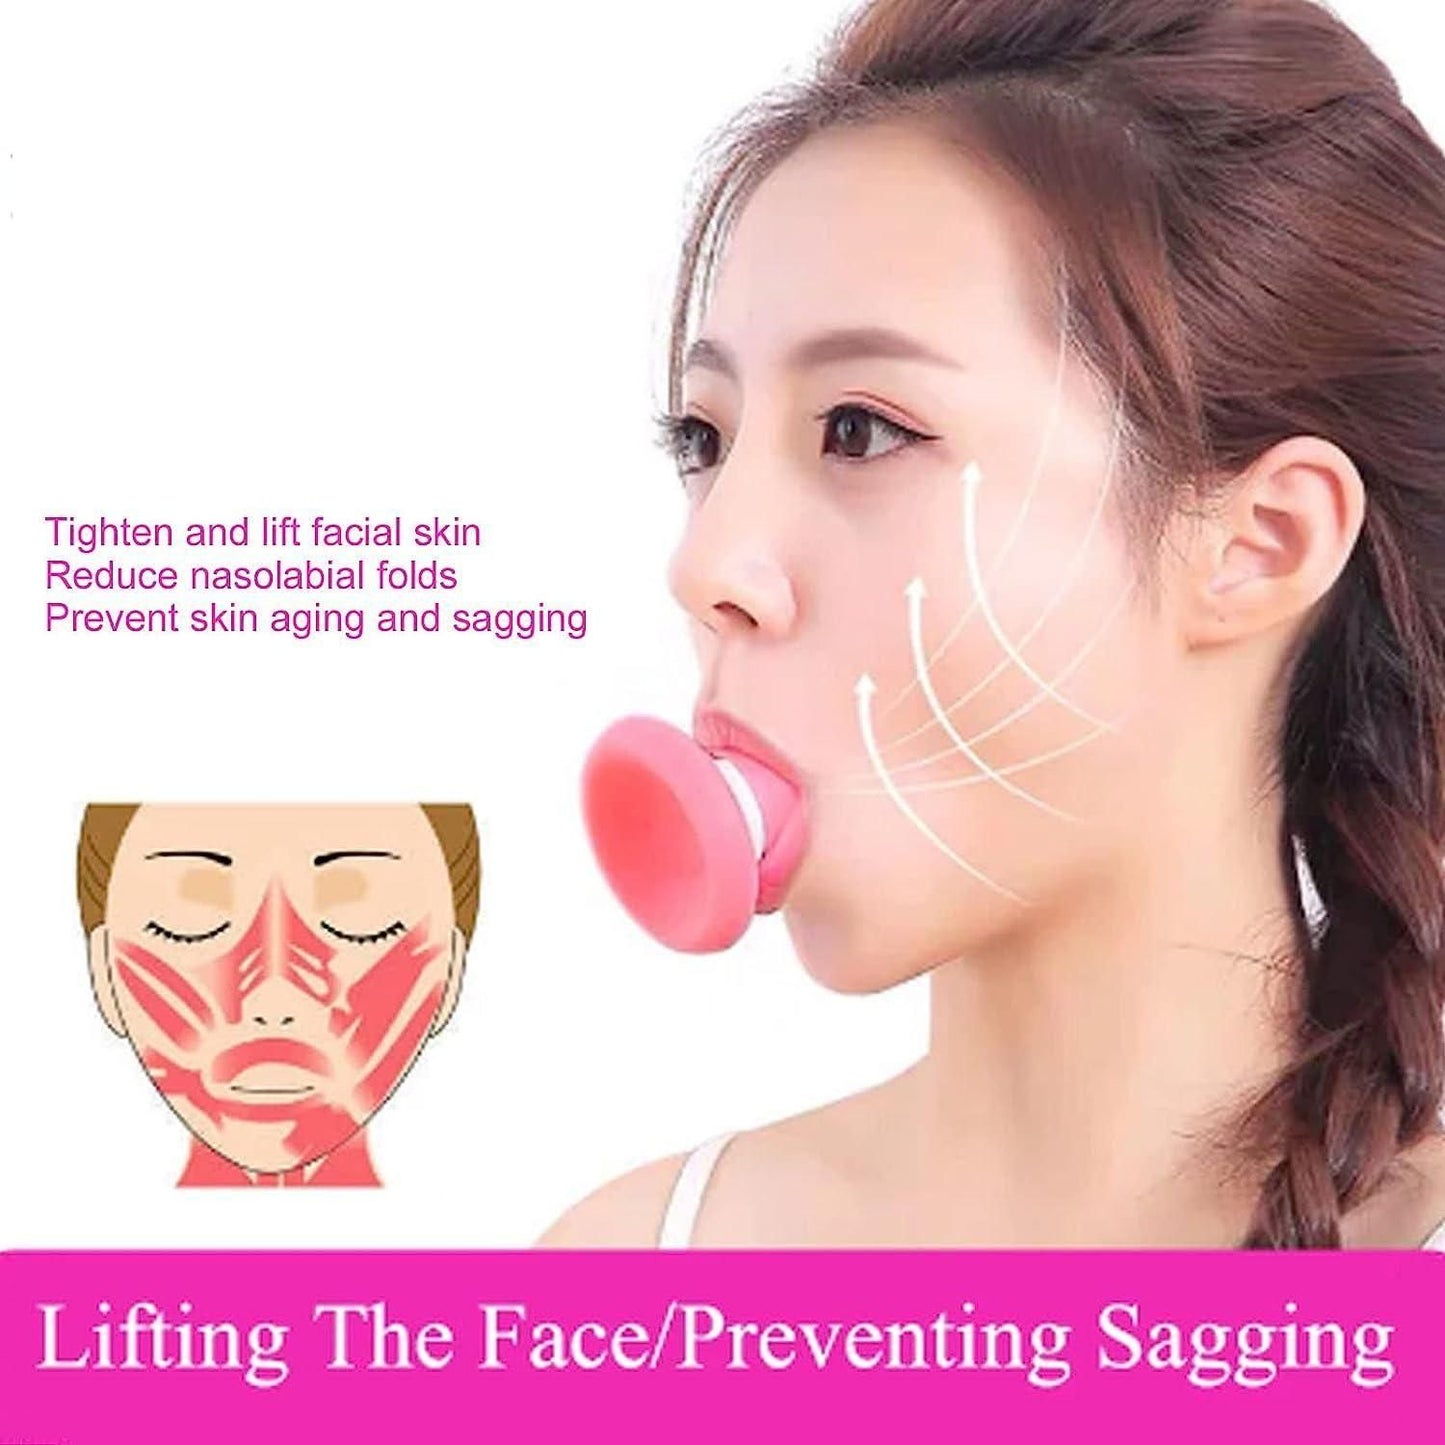 Facial Jaw Exerciser: Silicone Breathing Type Face Slimmer